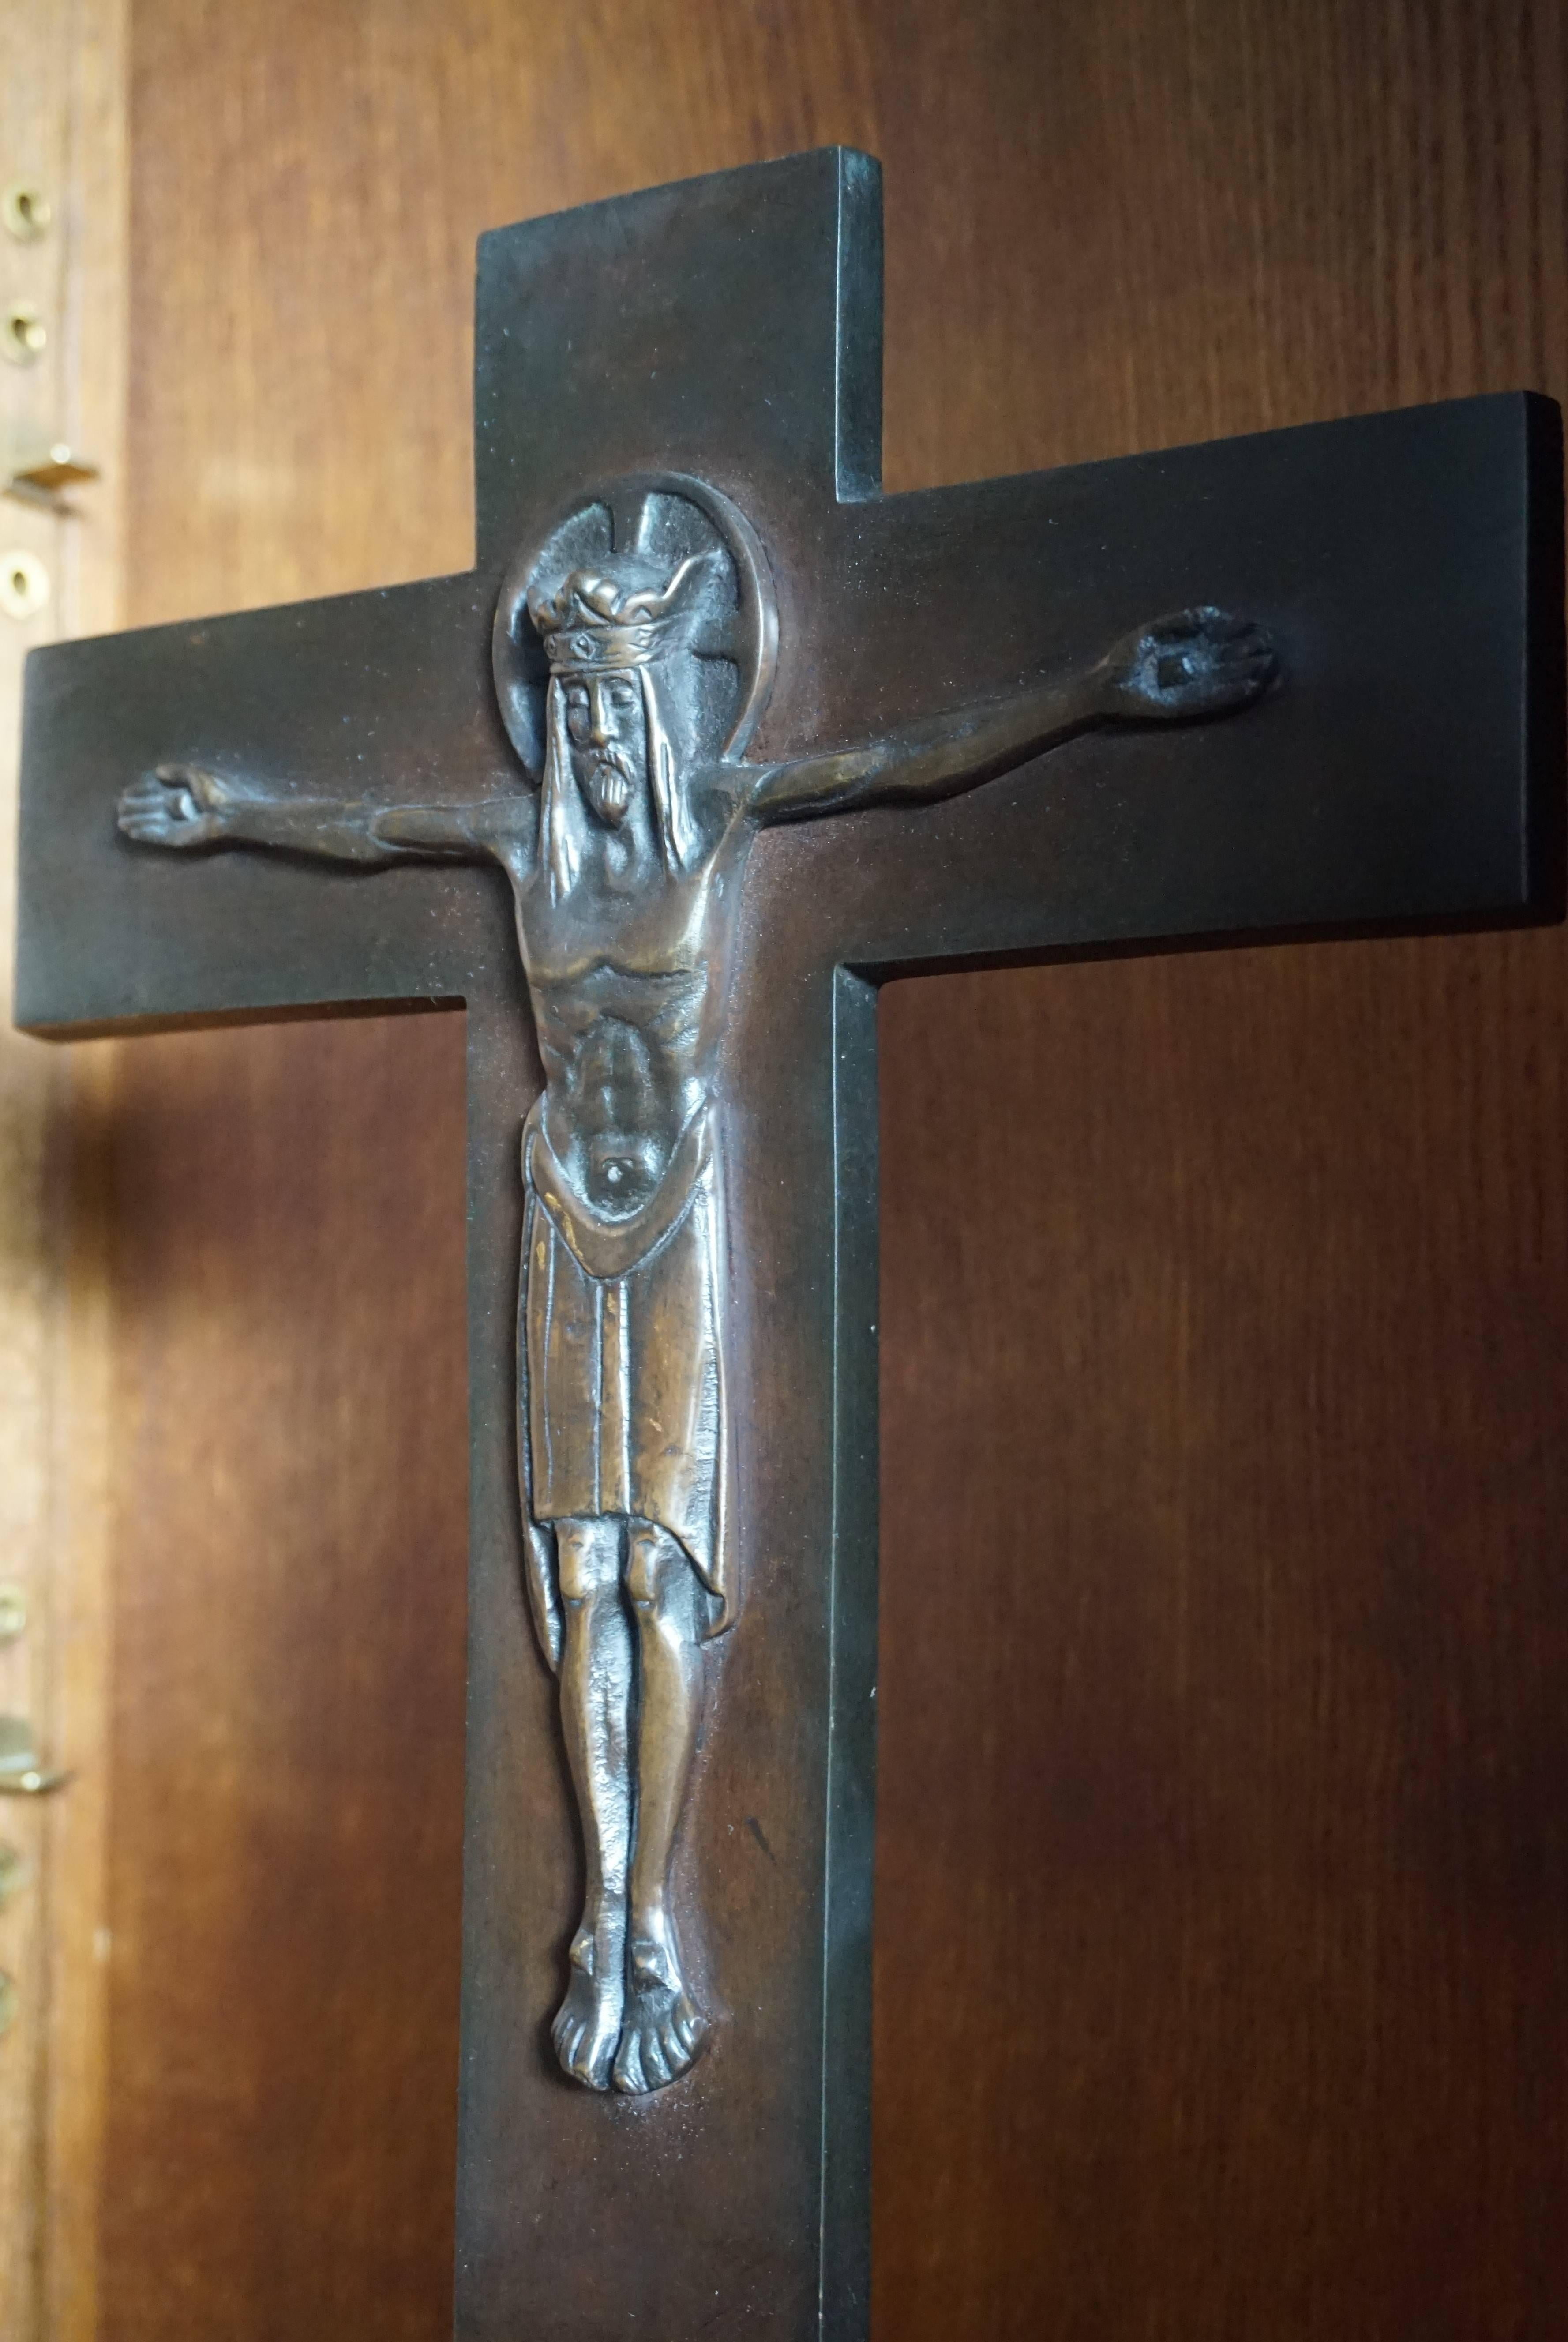 Practical size, all bronze Art Deco crucifix.

This rare and handcrafted, bronze crucifix stands on a good size, integrated base. It dates from 1910-1920 and you can tell by the extra rectangular shape that it is very much Art Deco in style and